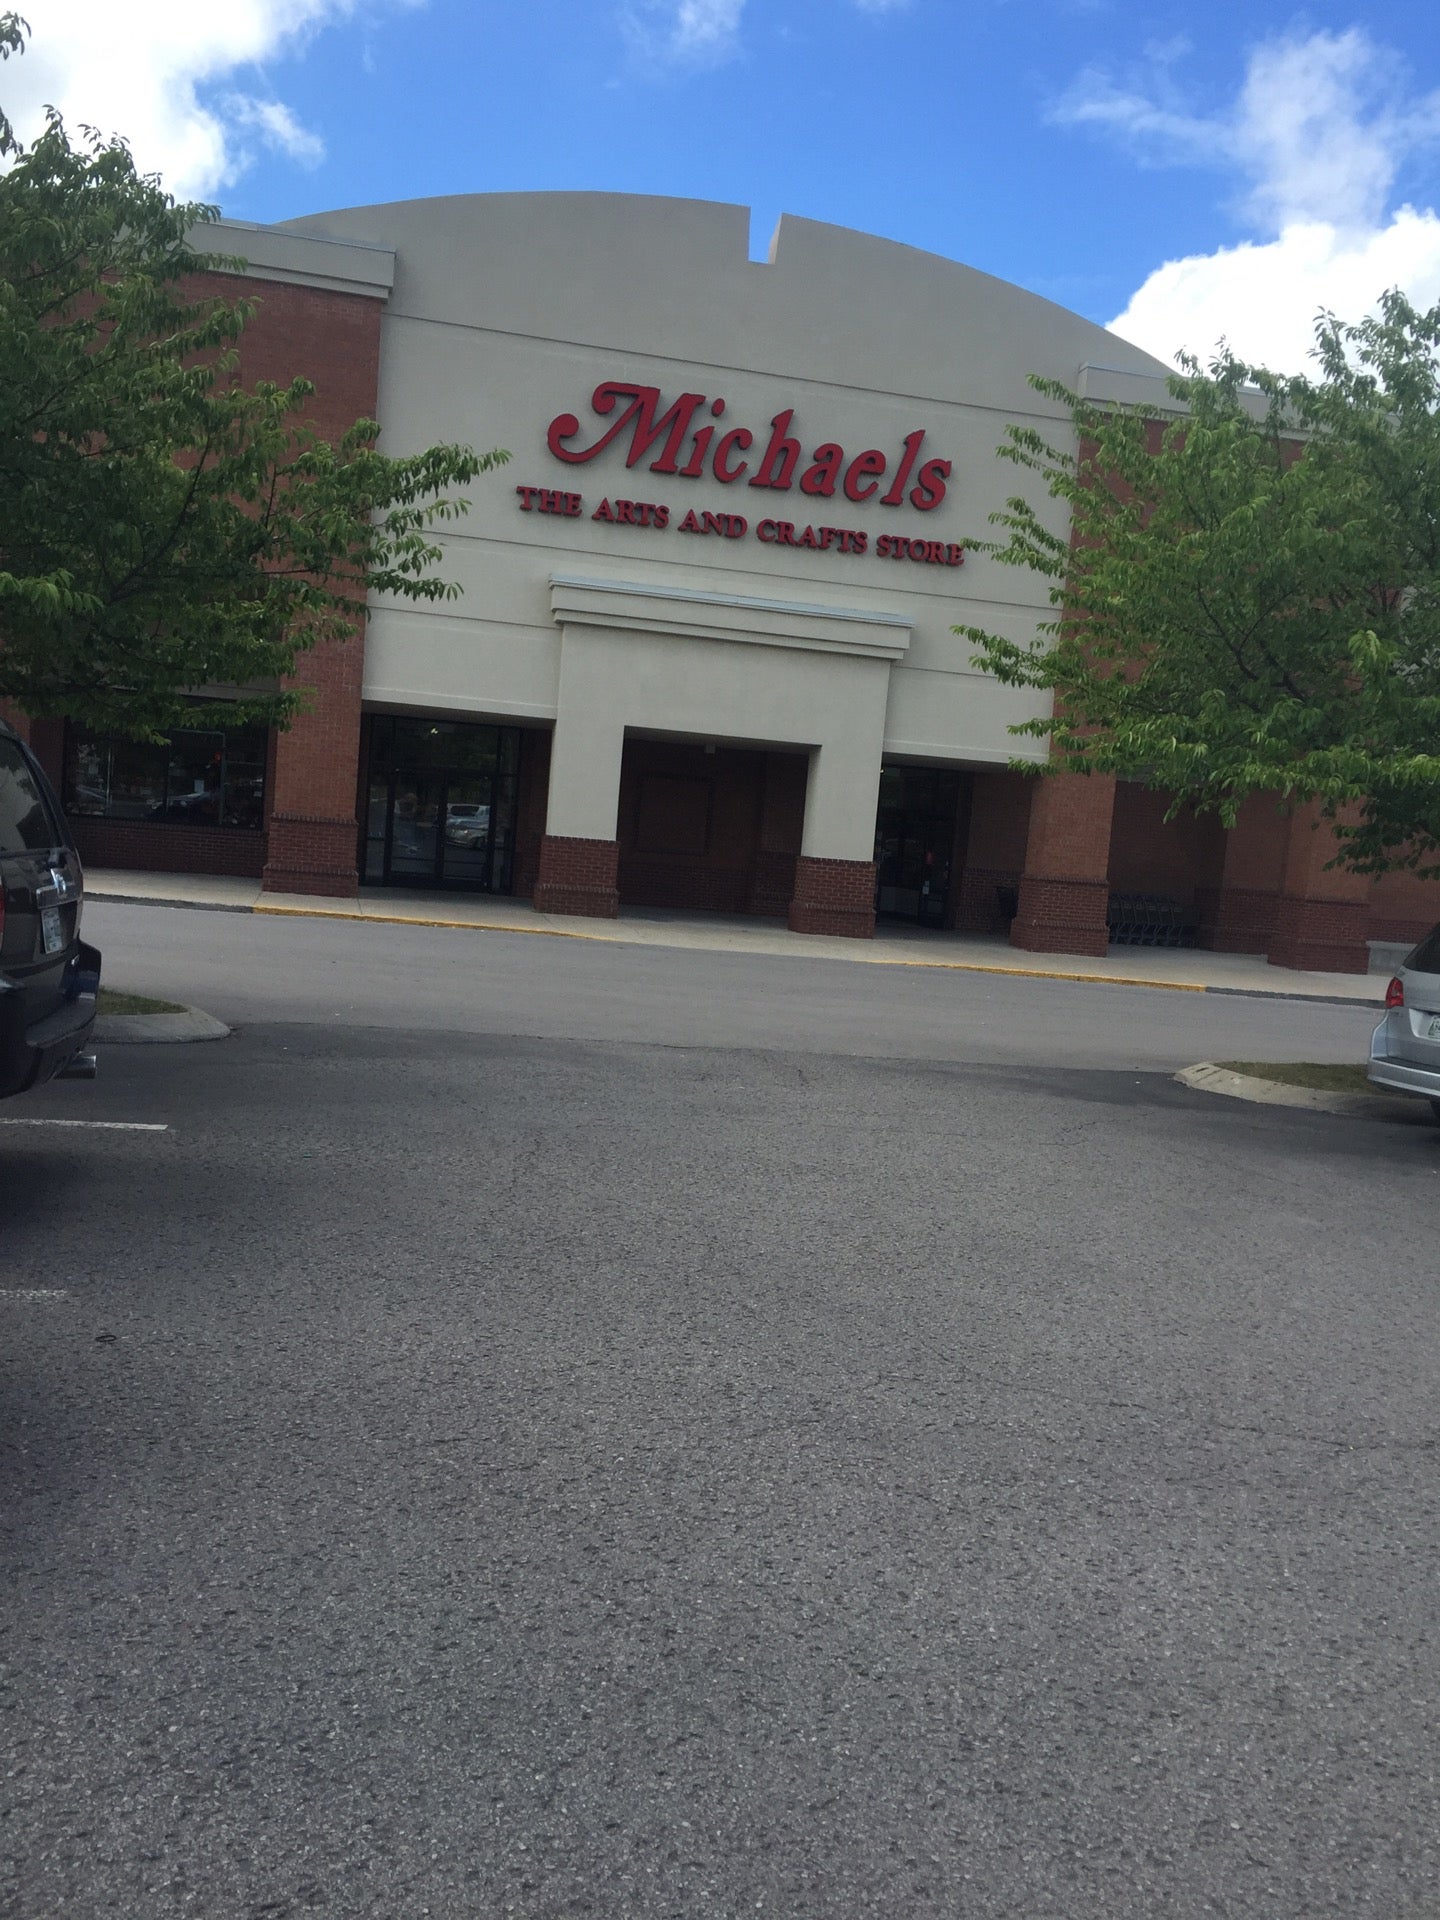 Michaels, 1519 S Brentwood Blvd, Saint Louis, MO, Arts and crafts